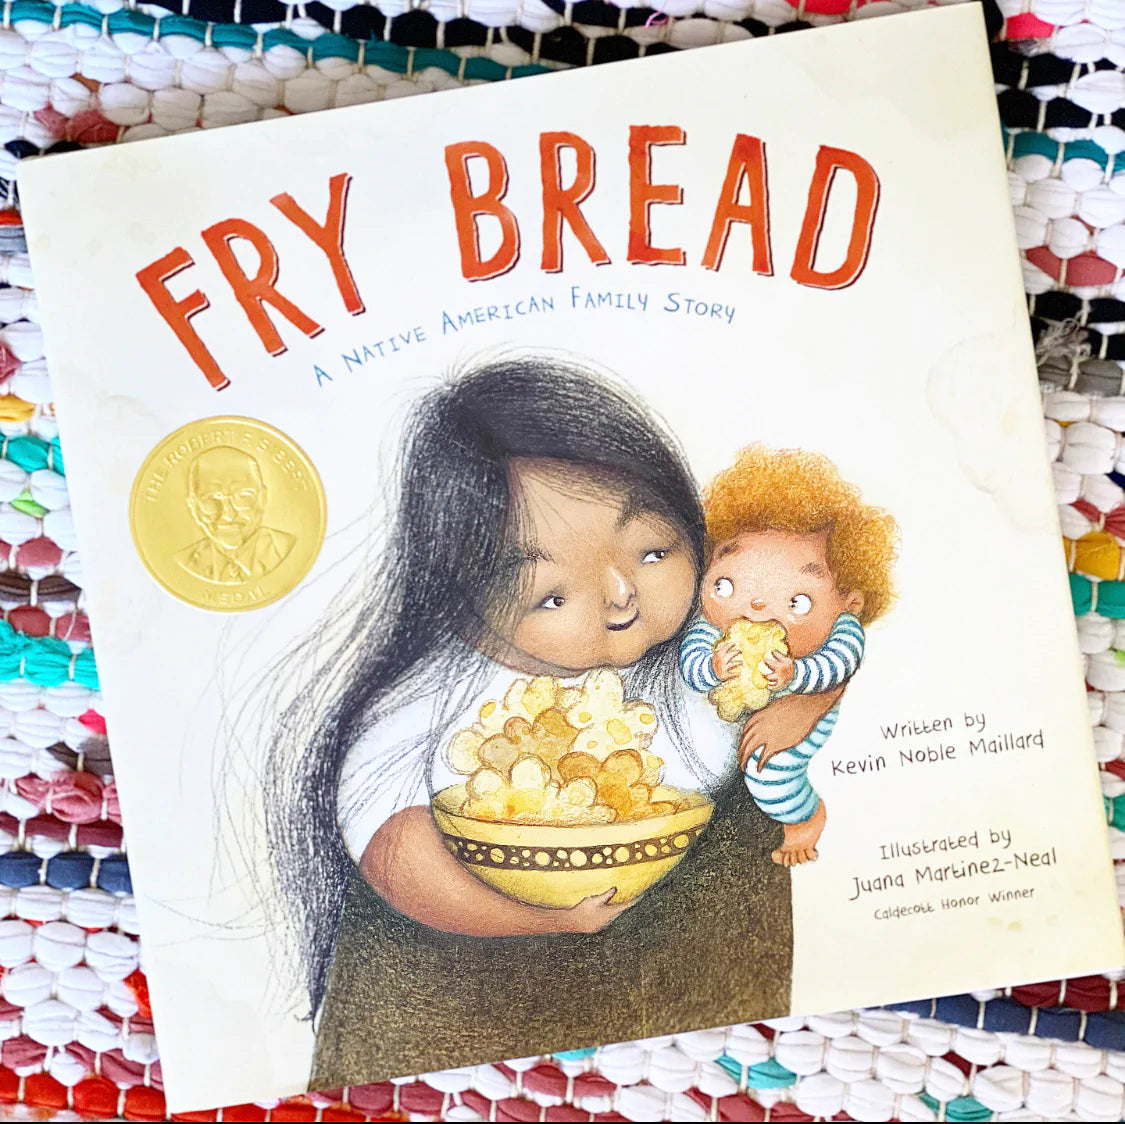 fry bread - by kevin noble maillard